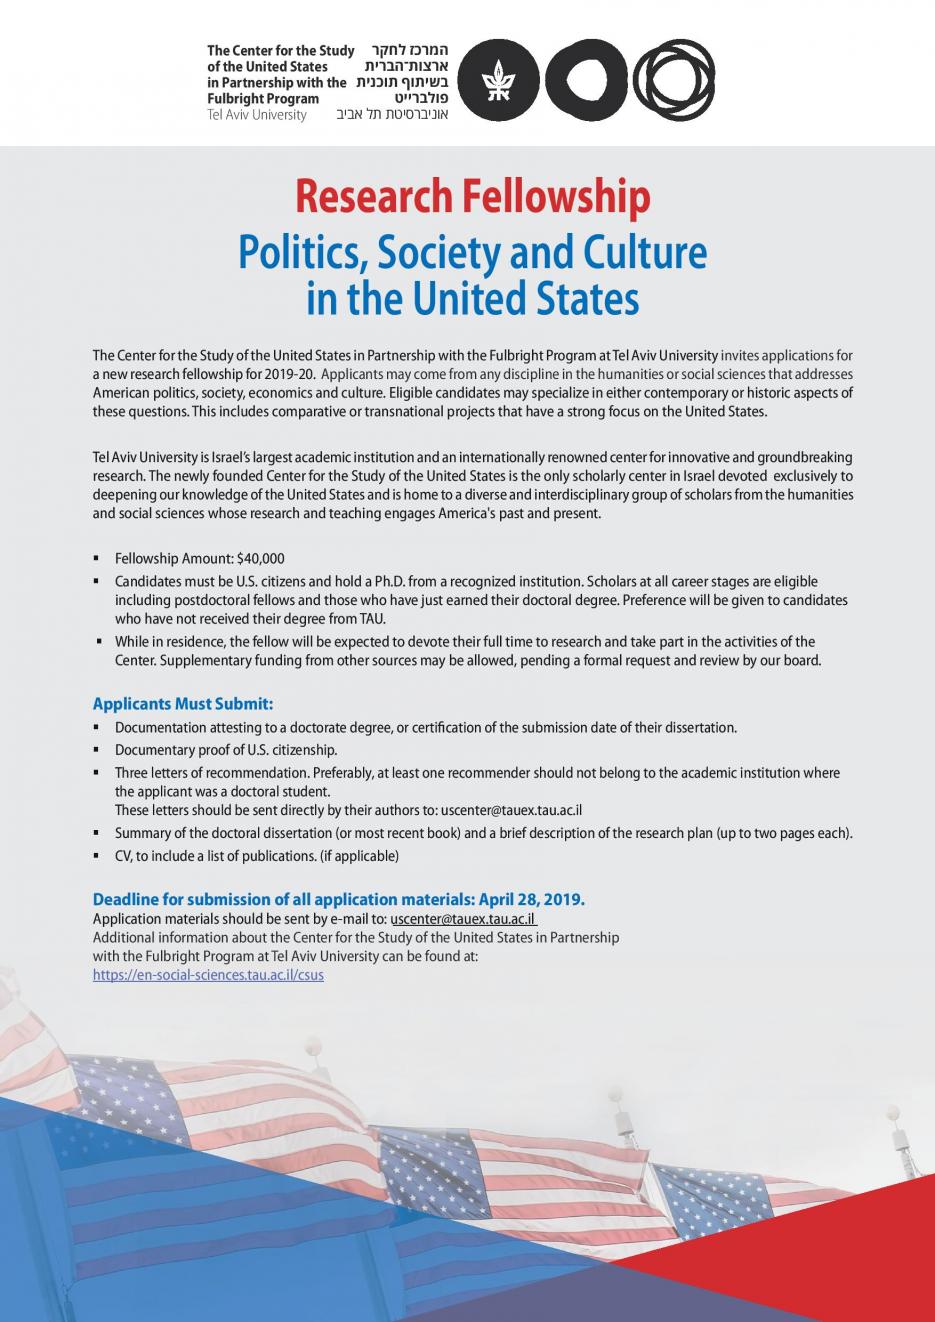 Politics, Society and Culture in the United States